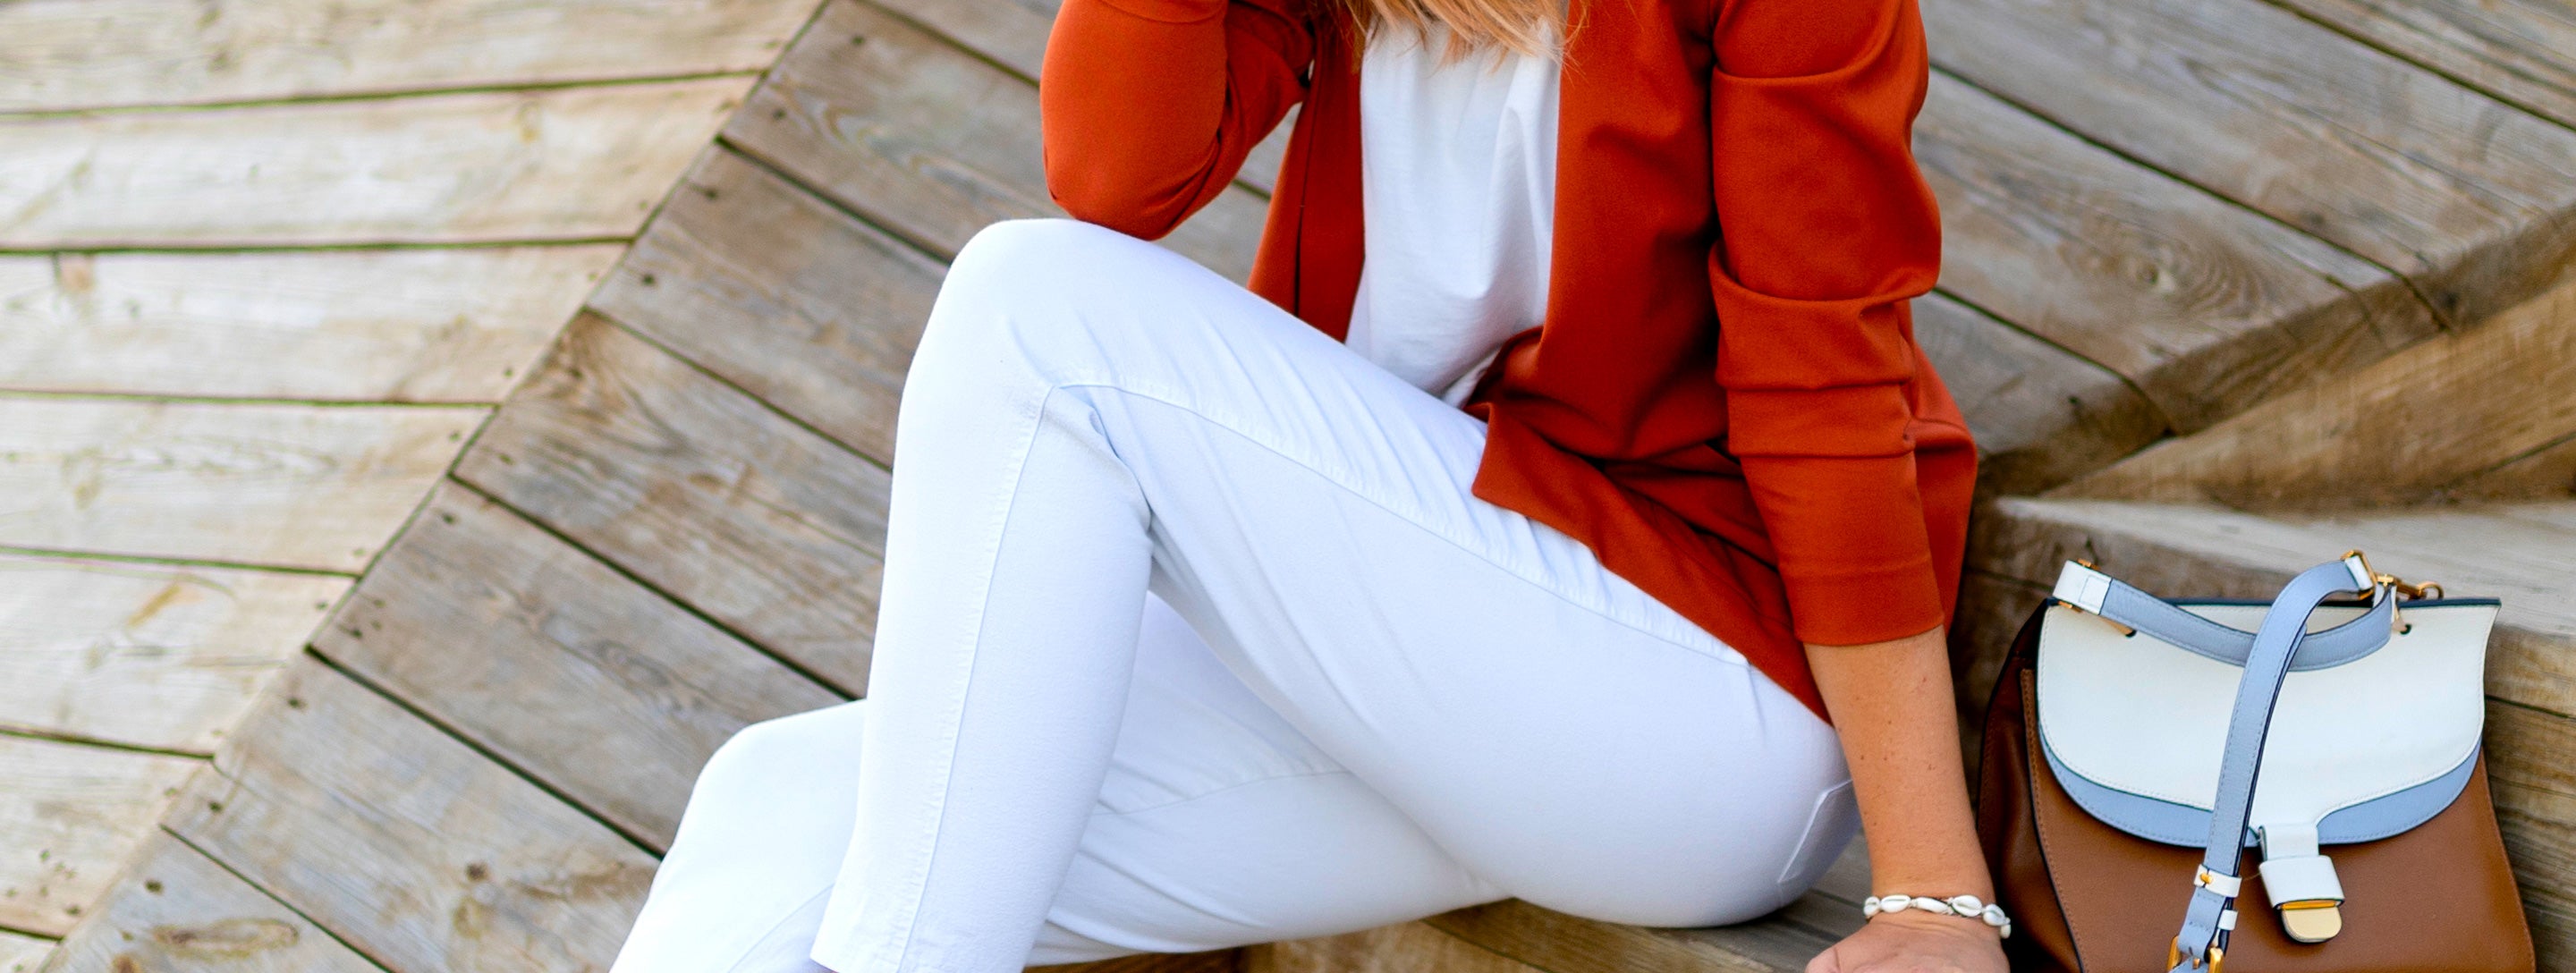 How to Wear White Jeans in the Winter - The Girl from Panama